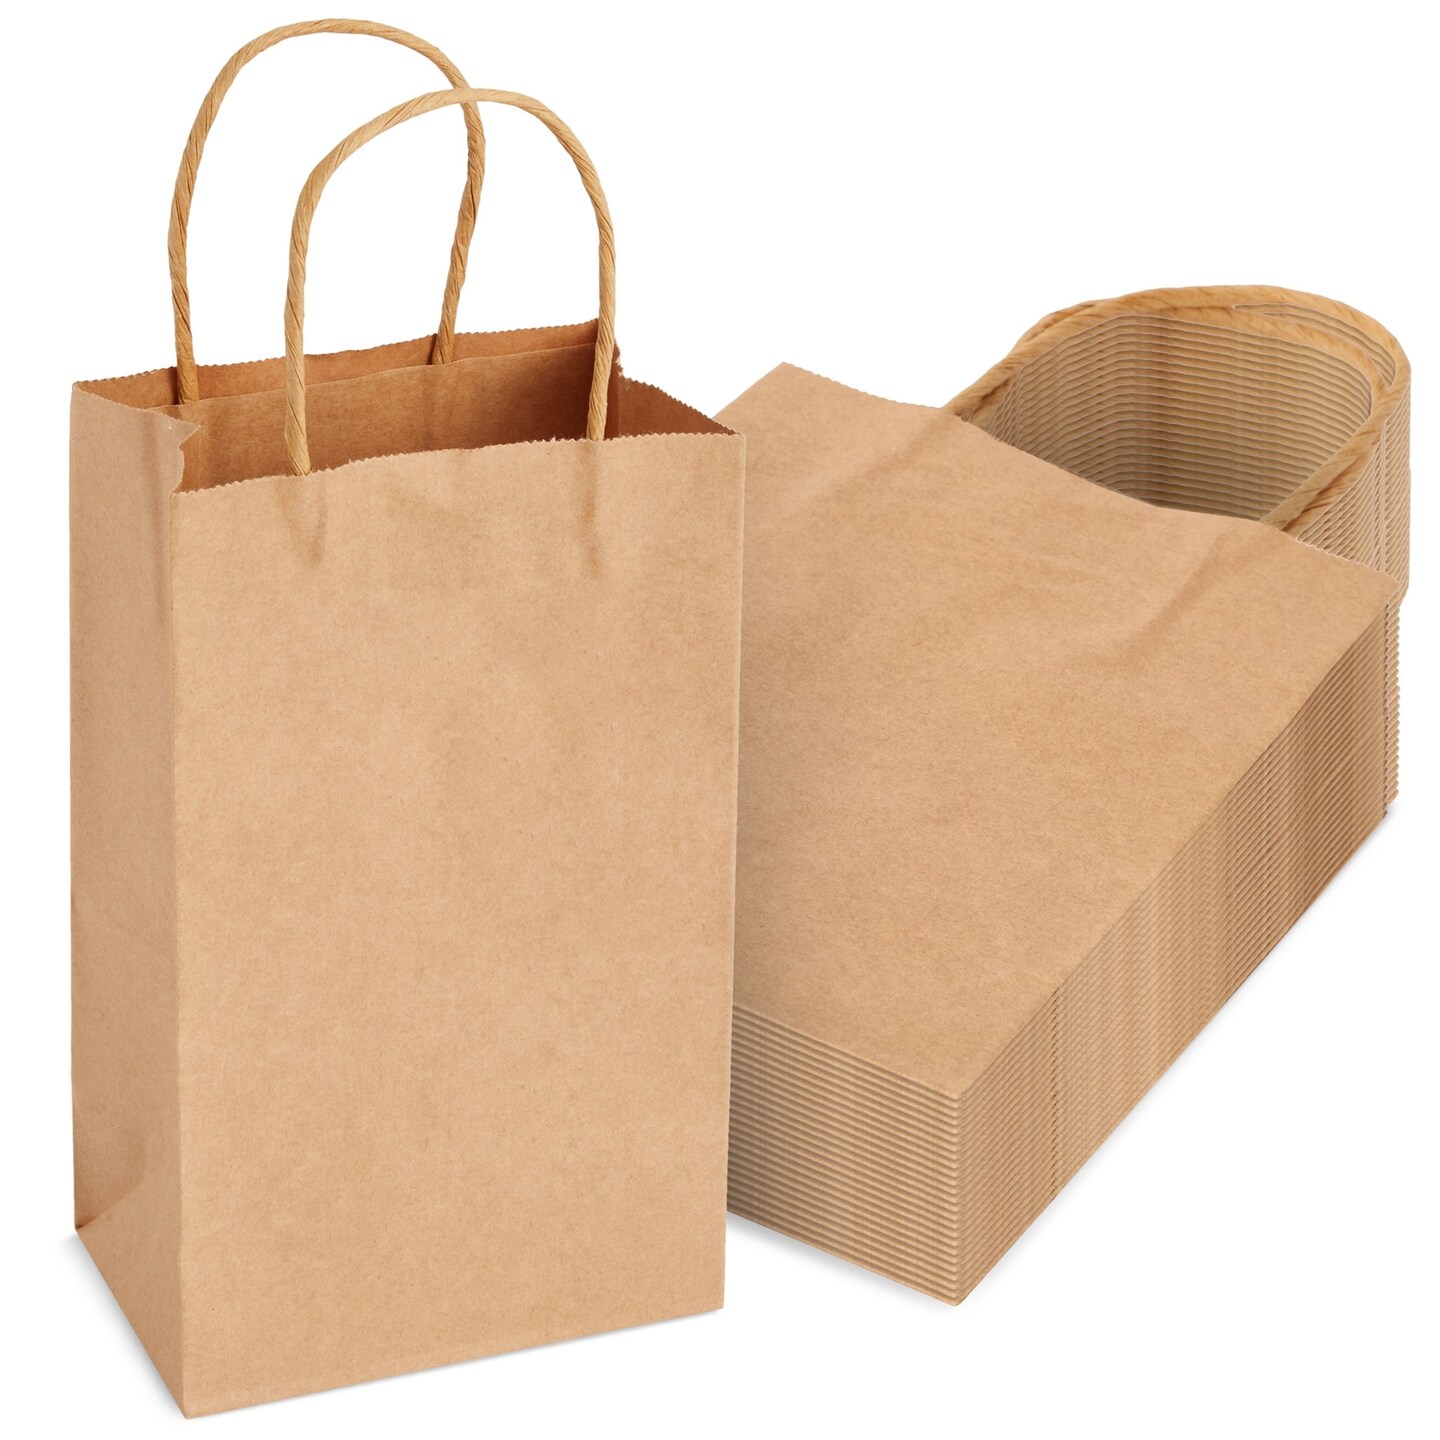 24-Pack Small Gift Bags with Handles, 5.3x3x8.5 Inch Bulk Kraft Paper Material Brown Bags, Use for Birthday Party Favors, Reusable Grocery, Retail Shopping, Business, Goodies